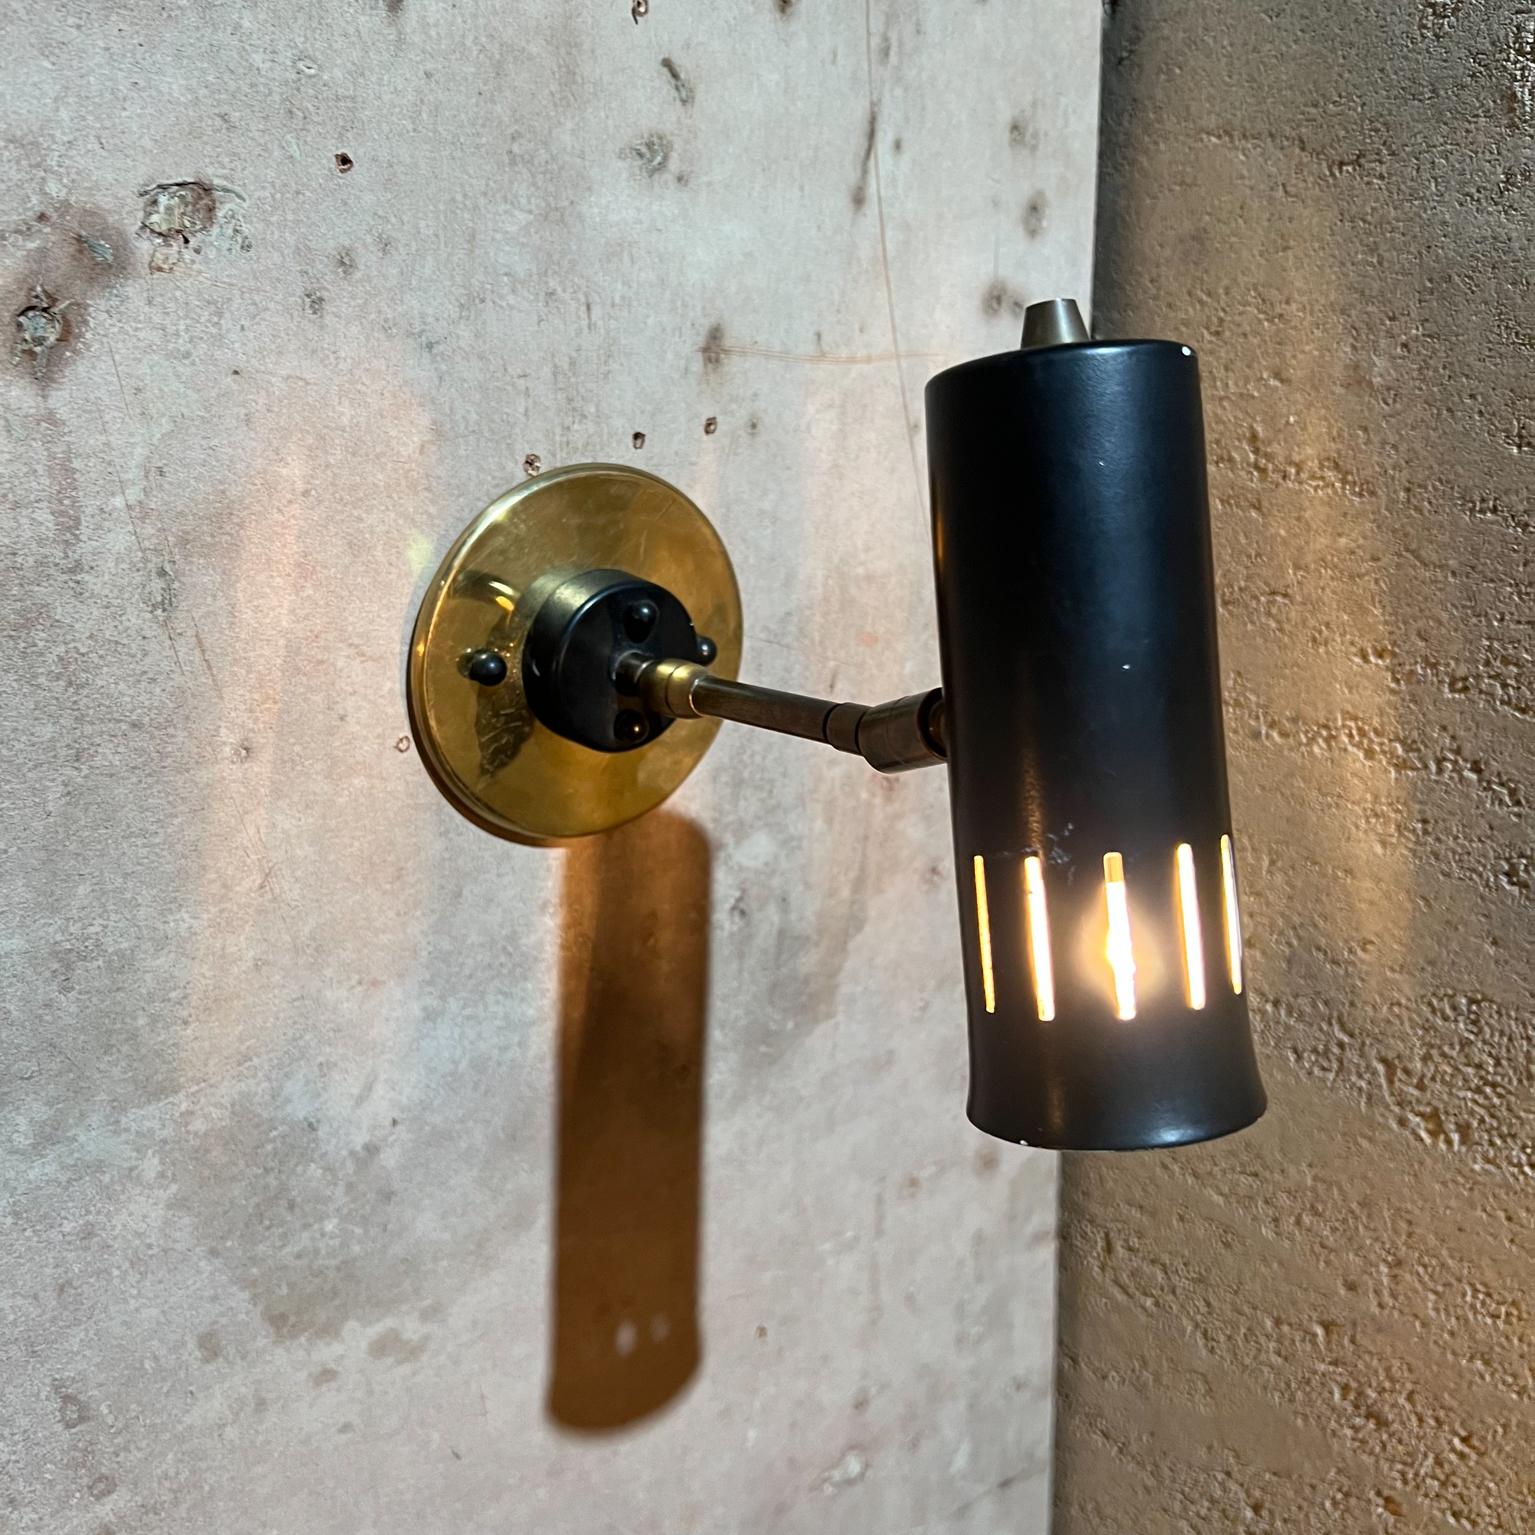 1960s Modern Stilnovo Sconce Italy Retrofit New Brass Backplate + 6 available For Sale 2